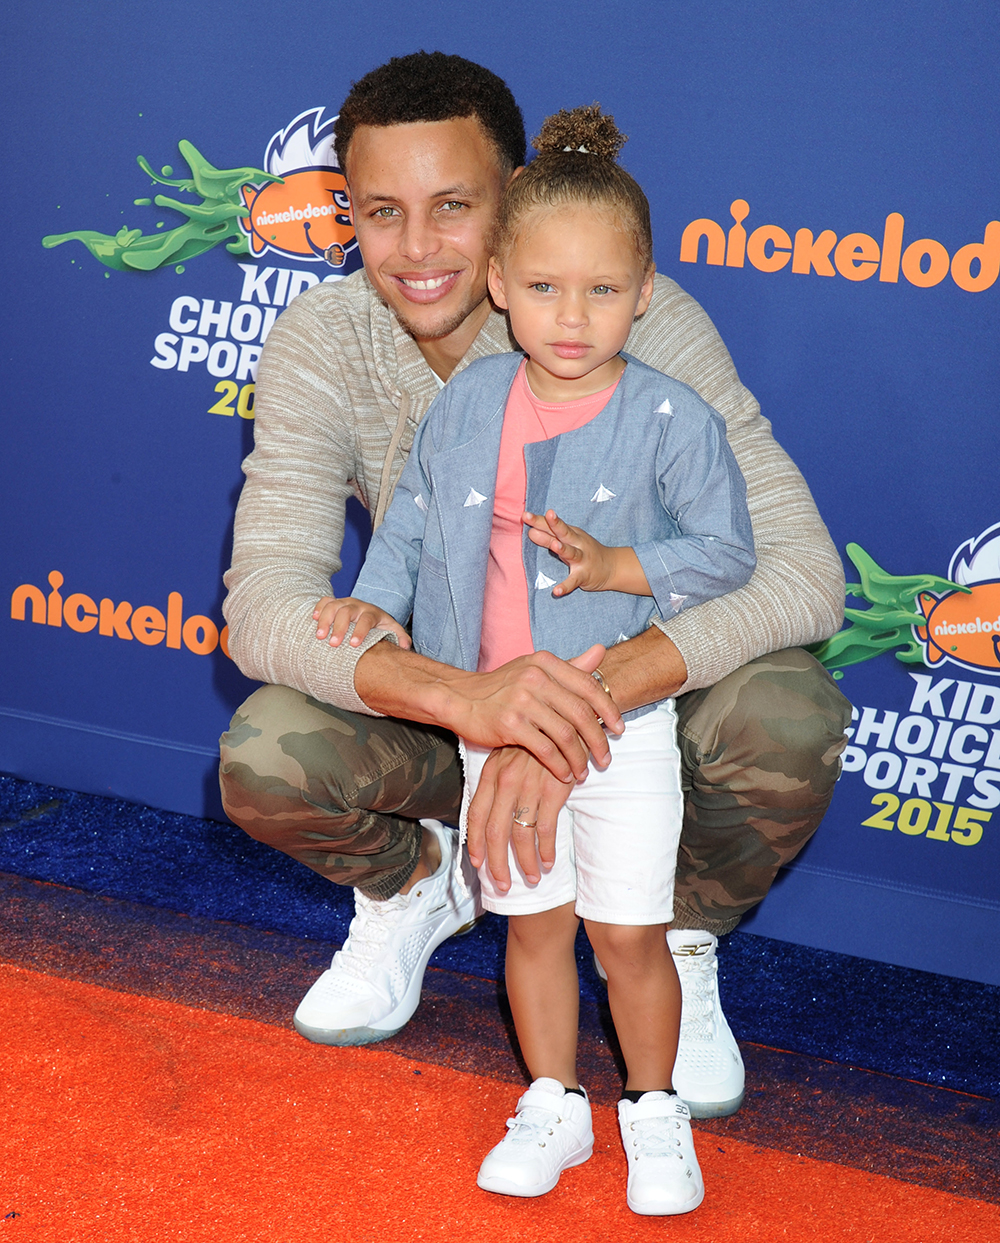 Hollywood, California, USA 9th July 2019 American Basketball player Stephen  Curry wife Ayesha Curry and daughters Riley Curry and Ryan Curry attend the  World Premiere of Disney's 'The Lion King' on July